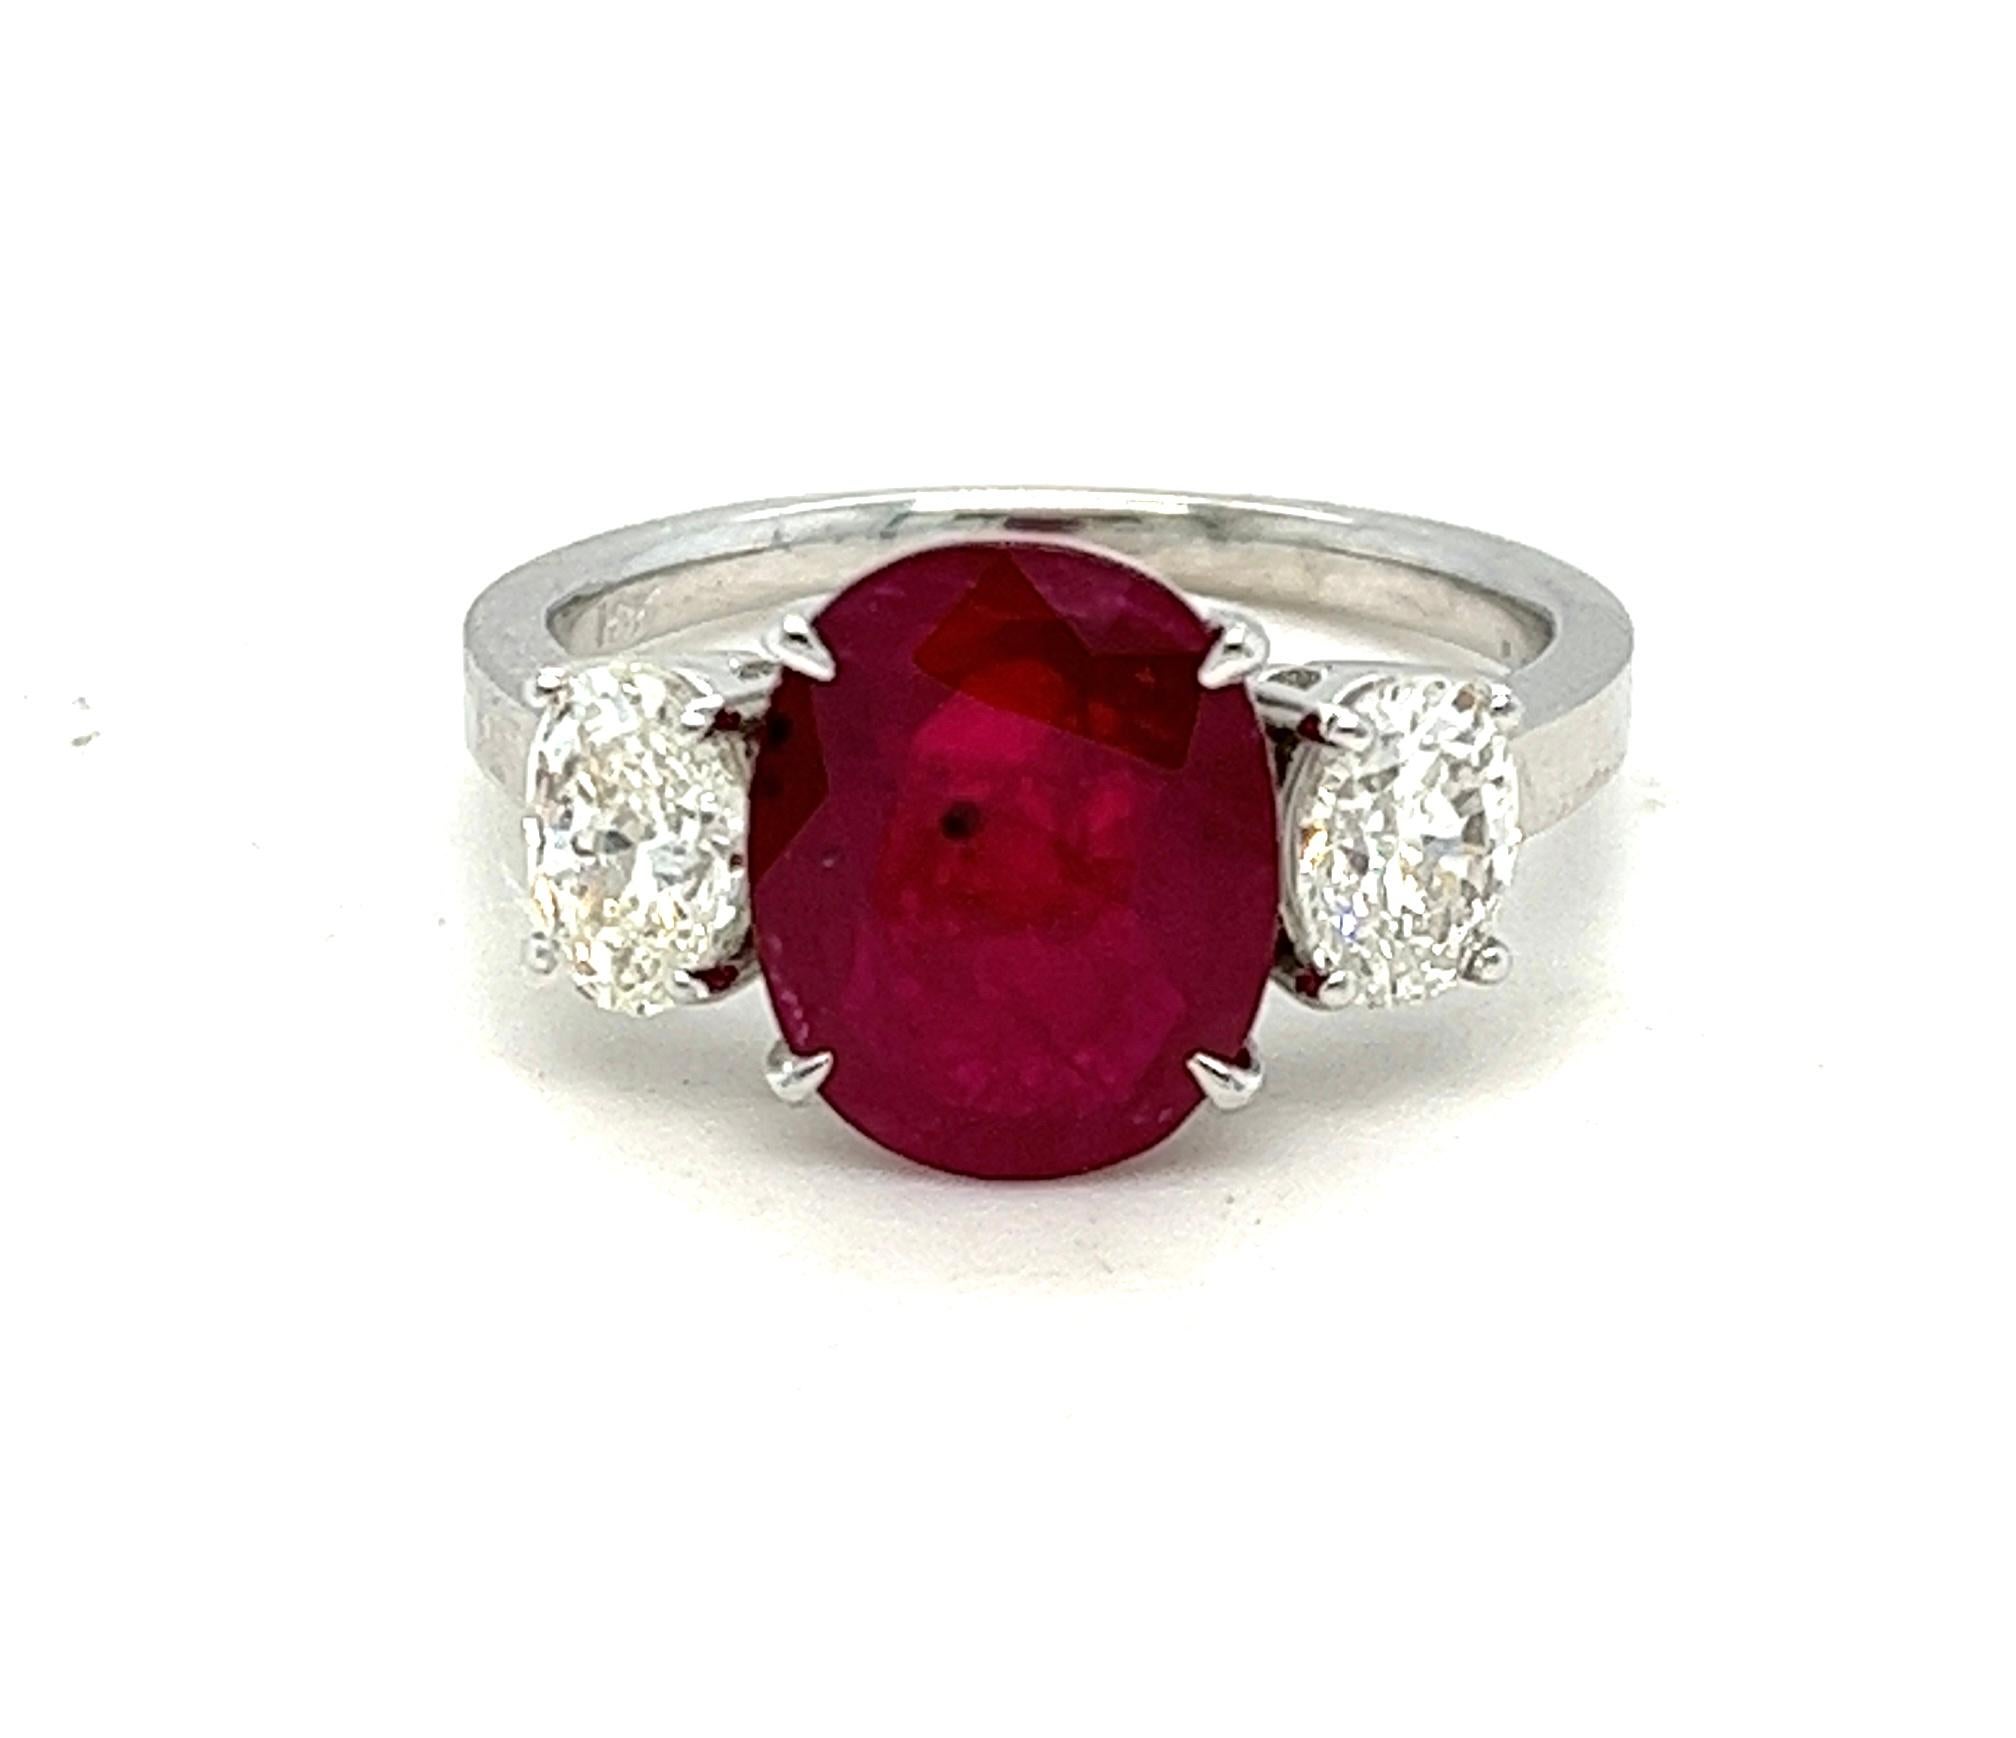 Offered here is a classic 3 stone engagement ring, simple yet so elegant.
Featuring a large 3.27 carat oval dark red natural ruby flanked with natural earth mined oval diamond on each side of the shank, mounted in solid 18 karat white gold ring, in